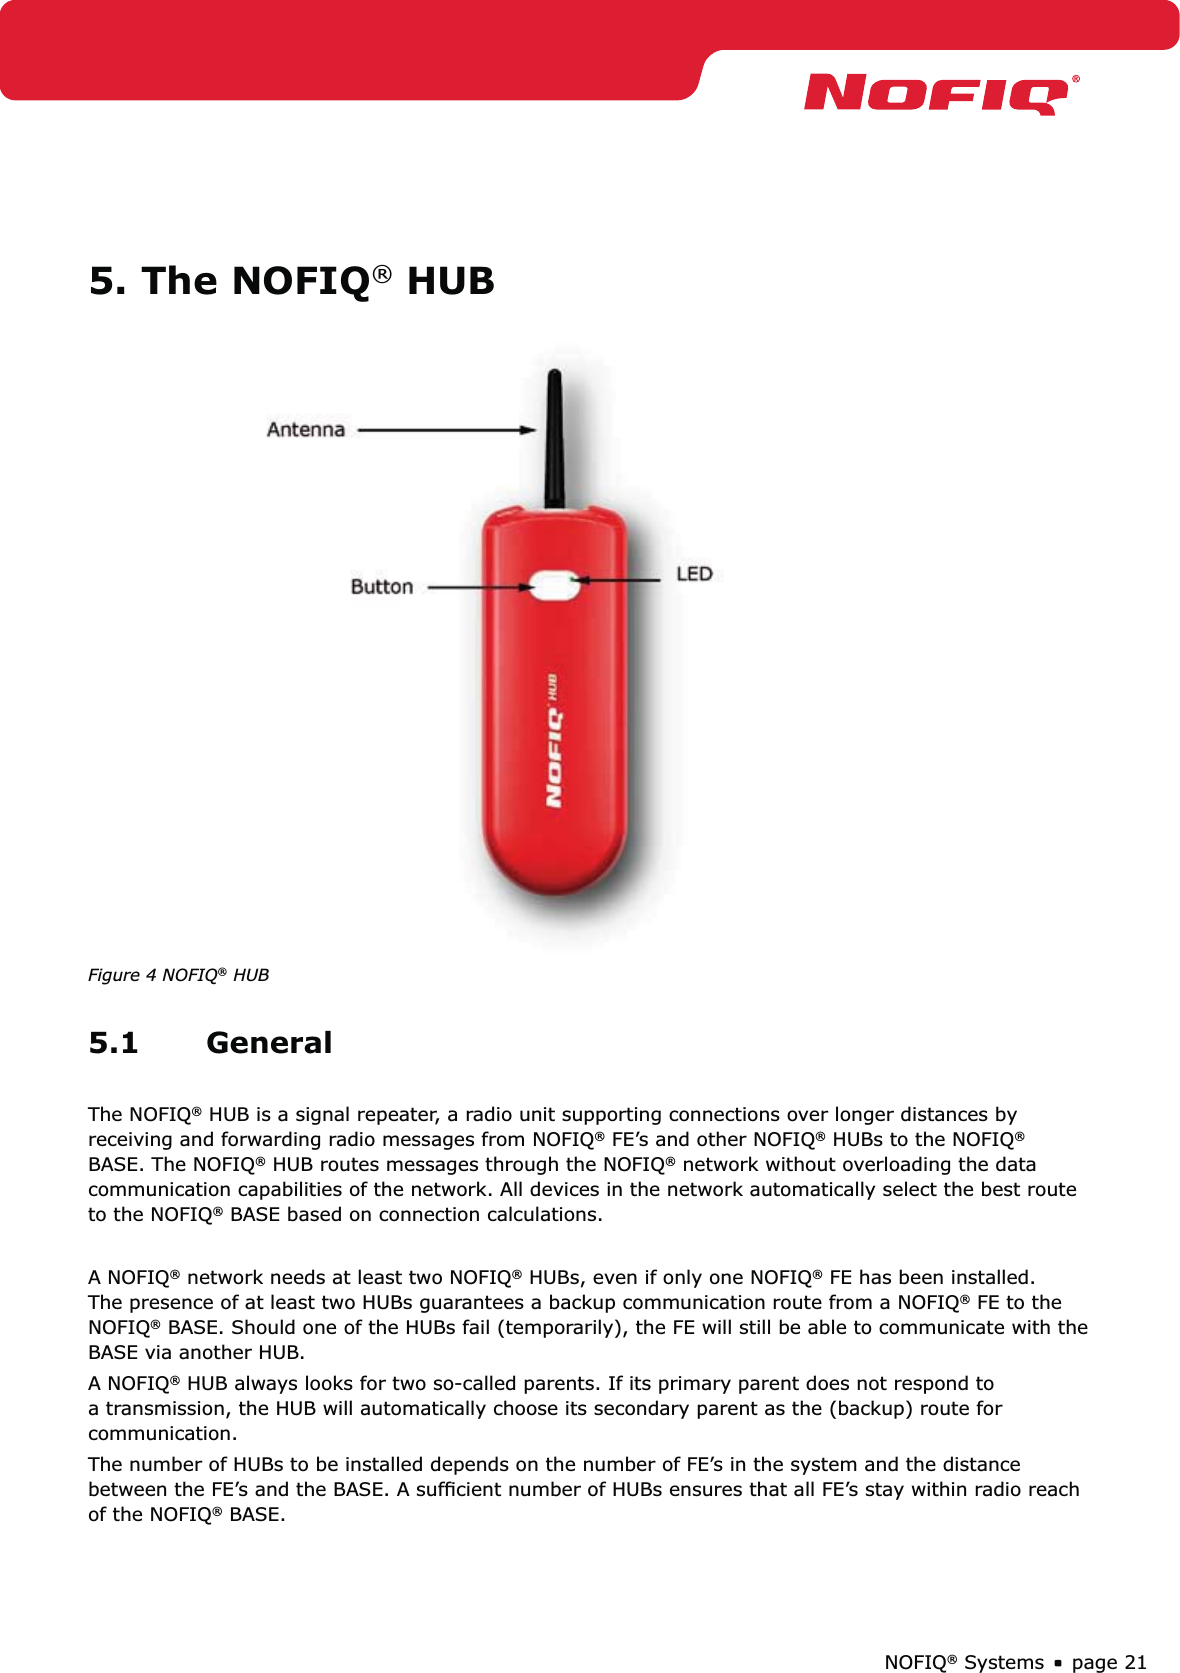 page 21NOFIQ® Systems5. The NOFIQ® HUBFigure 4 NOFIQ® HUB5.1 GeneralThe NOFIQ® HUB is a signal repeater, a radio unit supporting connections over longer distances by receiving and forwarding radio messages from NOFIQ® FE’s and other NOFIQ® HUBs to the NOFIQ® BASE. The NOFIQ® HUB routes messages through the NOFIQ® network without overloading the data communication capabilities of the network. All devices in the network automatically select the best route to the NOFIQ® BASE based on connection calculations.A NOFIQ® network needs at least two NOFIQ® HUBs, even if only one NOFIQ® FE has been installed. The presence of at least two HUBs guarantees a backup communication route from a NOFIQ® FE to the NOFIQ® BASE. Should one of the HUBs fail (temporarily), the FE will still be able to communicate with the BASE via another HUB.A NOFIQ® HUB always looks for two so-called parents. If its primary parent does not respond to a transmission, the HUB will automatically choose its secondary parent as the (backup) route for communication.The number of HUBs to be installed depends on the number of FE’s in the system and the distance between the FE’s and the BASE. A sufﬁcient number of HUBs ensures that all FE’s stay within radio reach of the NOFIQ® BASE.